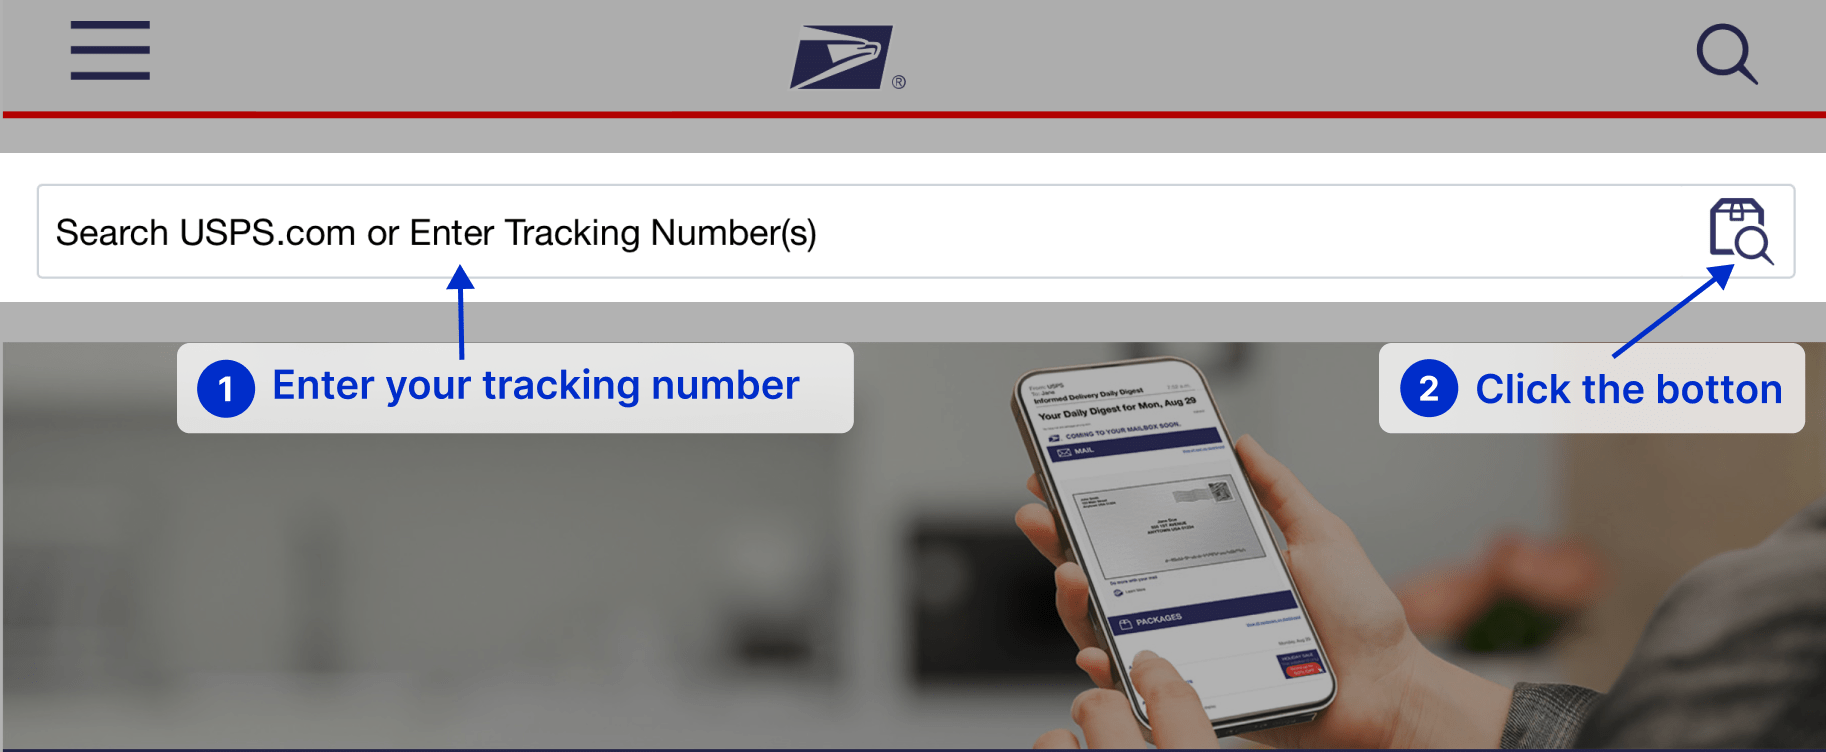 USPS Tracking. Learn how to track packages via USPS official webiste on your mobiel phone. Enter your tracking number on the USPS tarcking page.